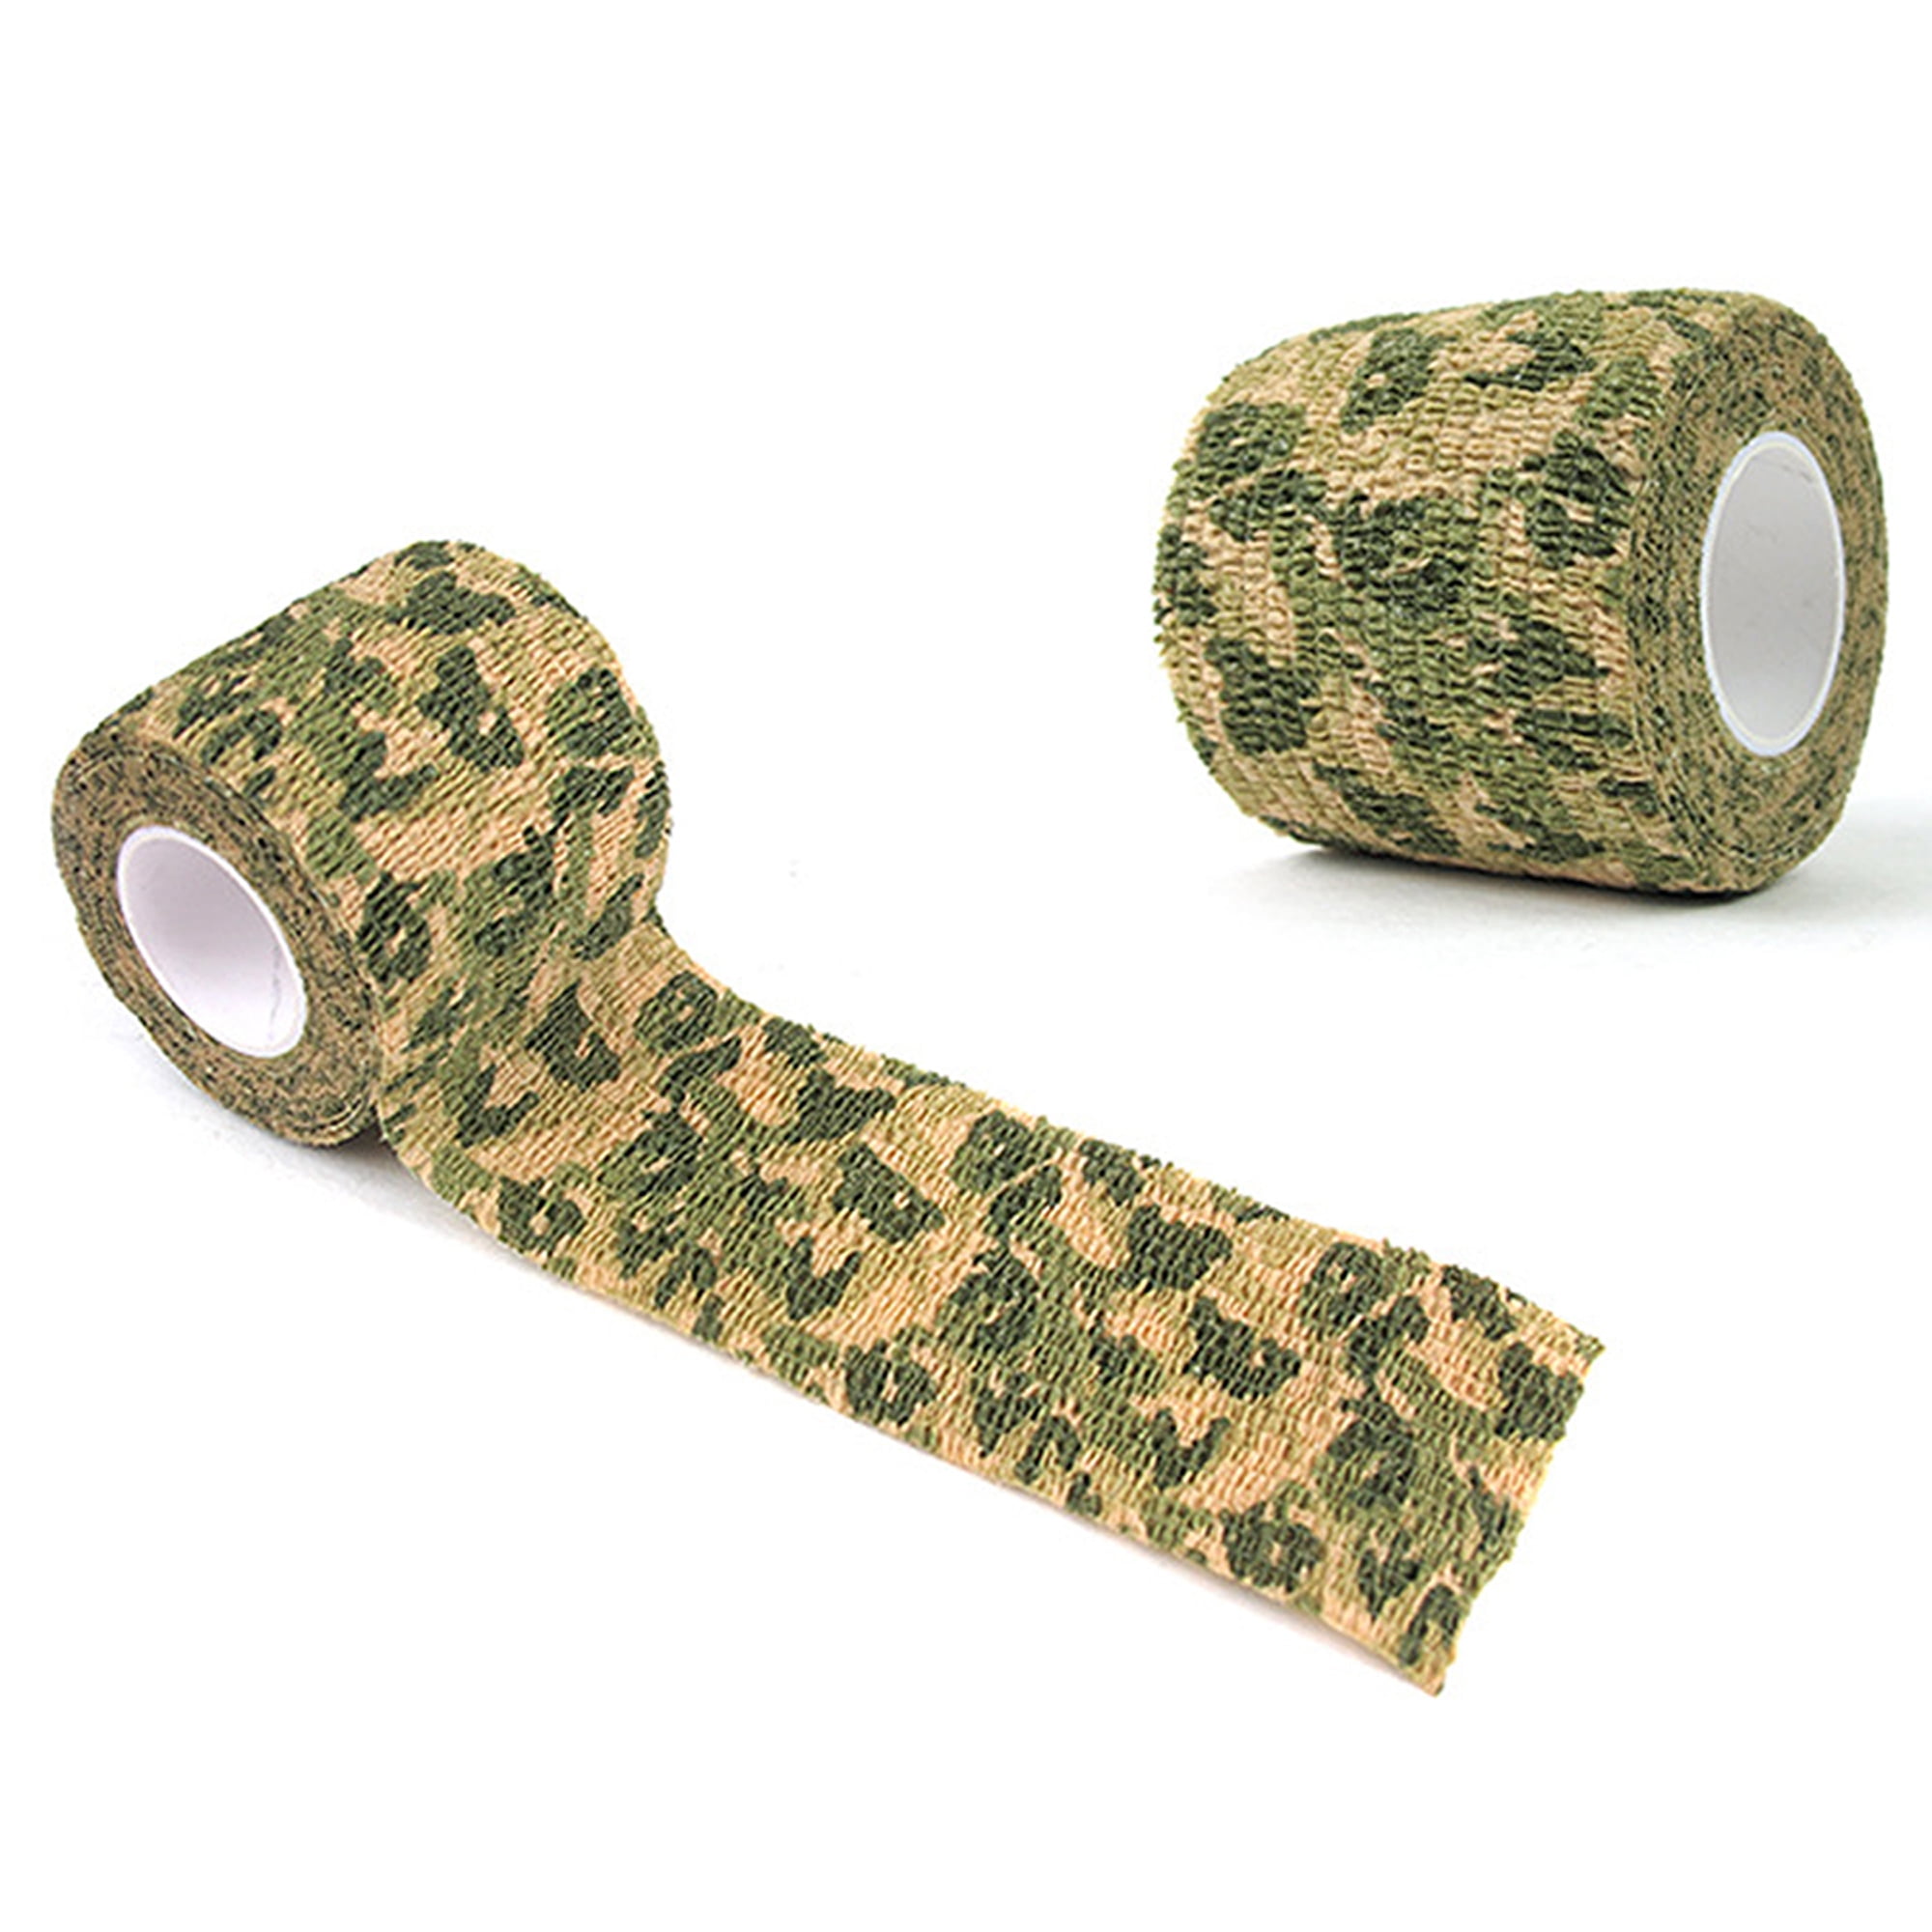 Details about   Military Waterproof Camouflage Tape Hunting Gun Camo Wrap Bandage Self-adhesive 